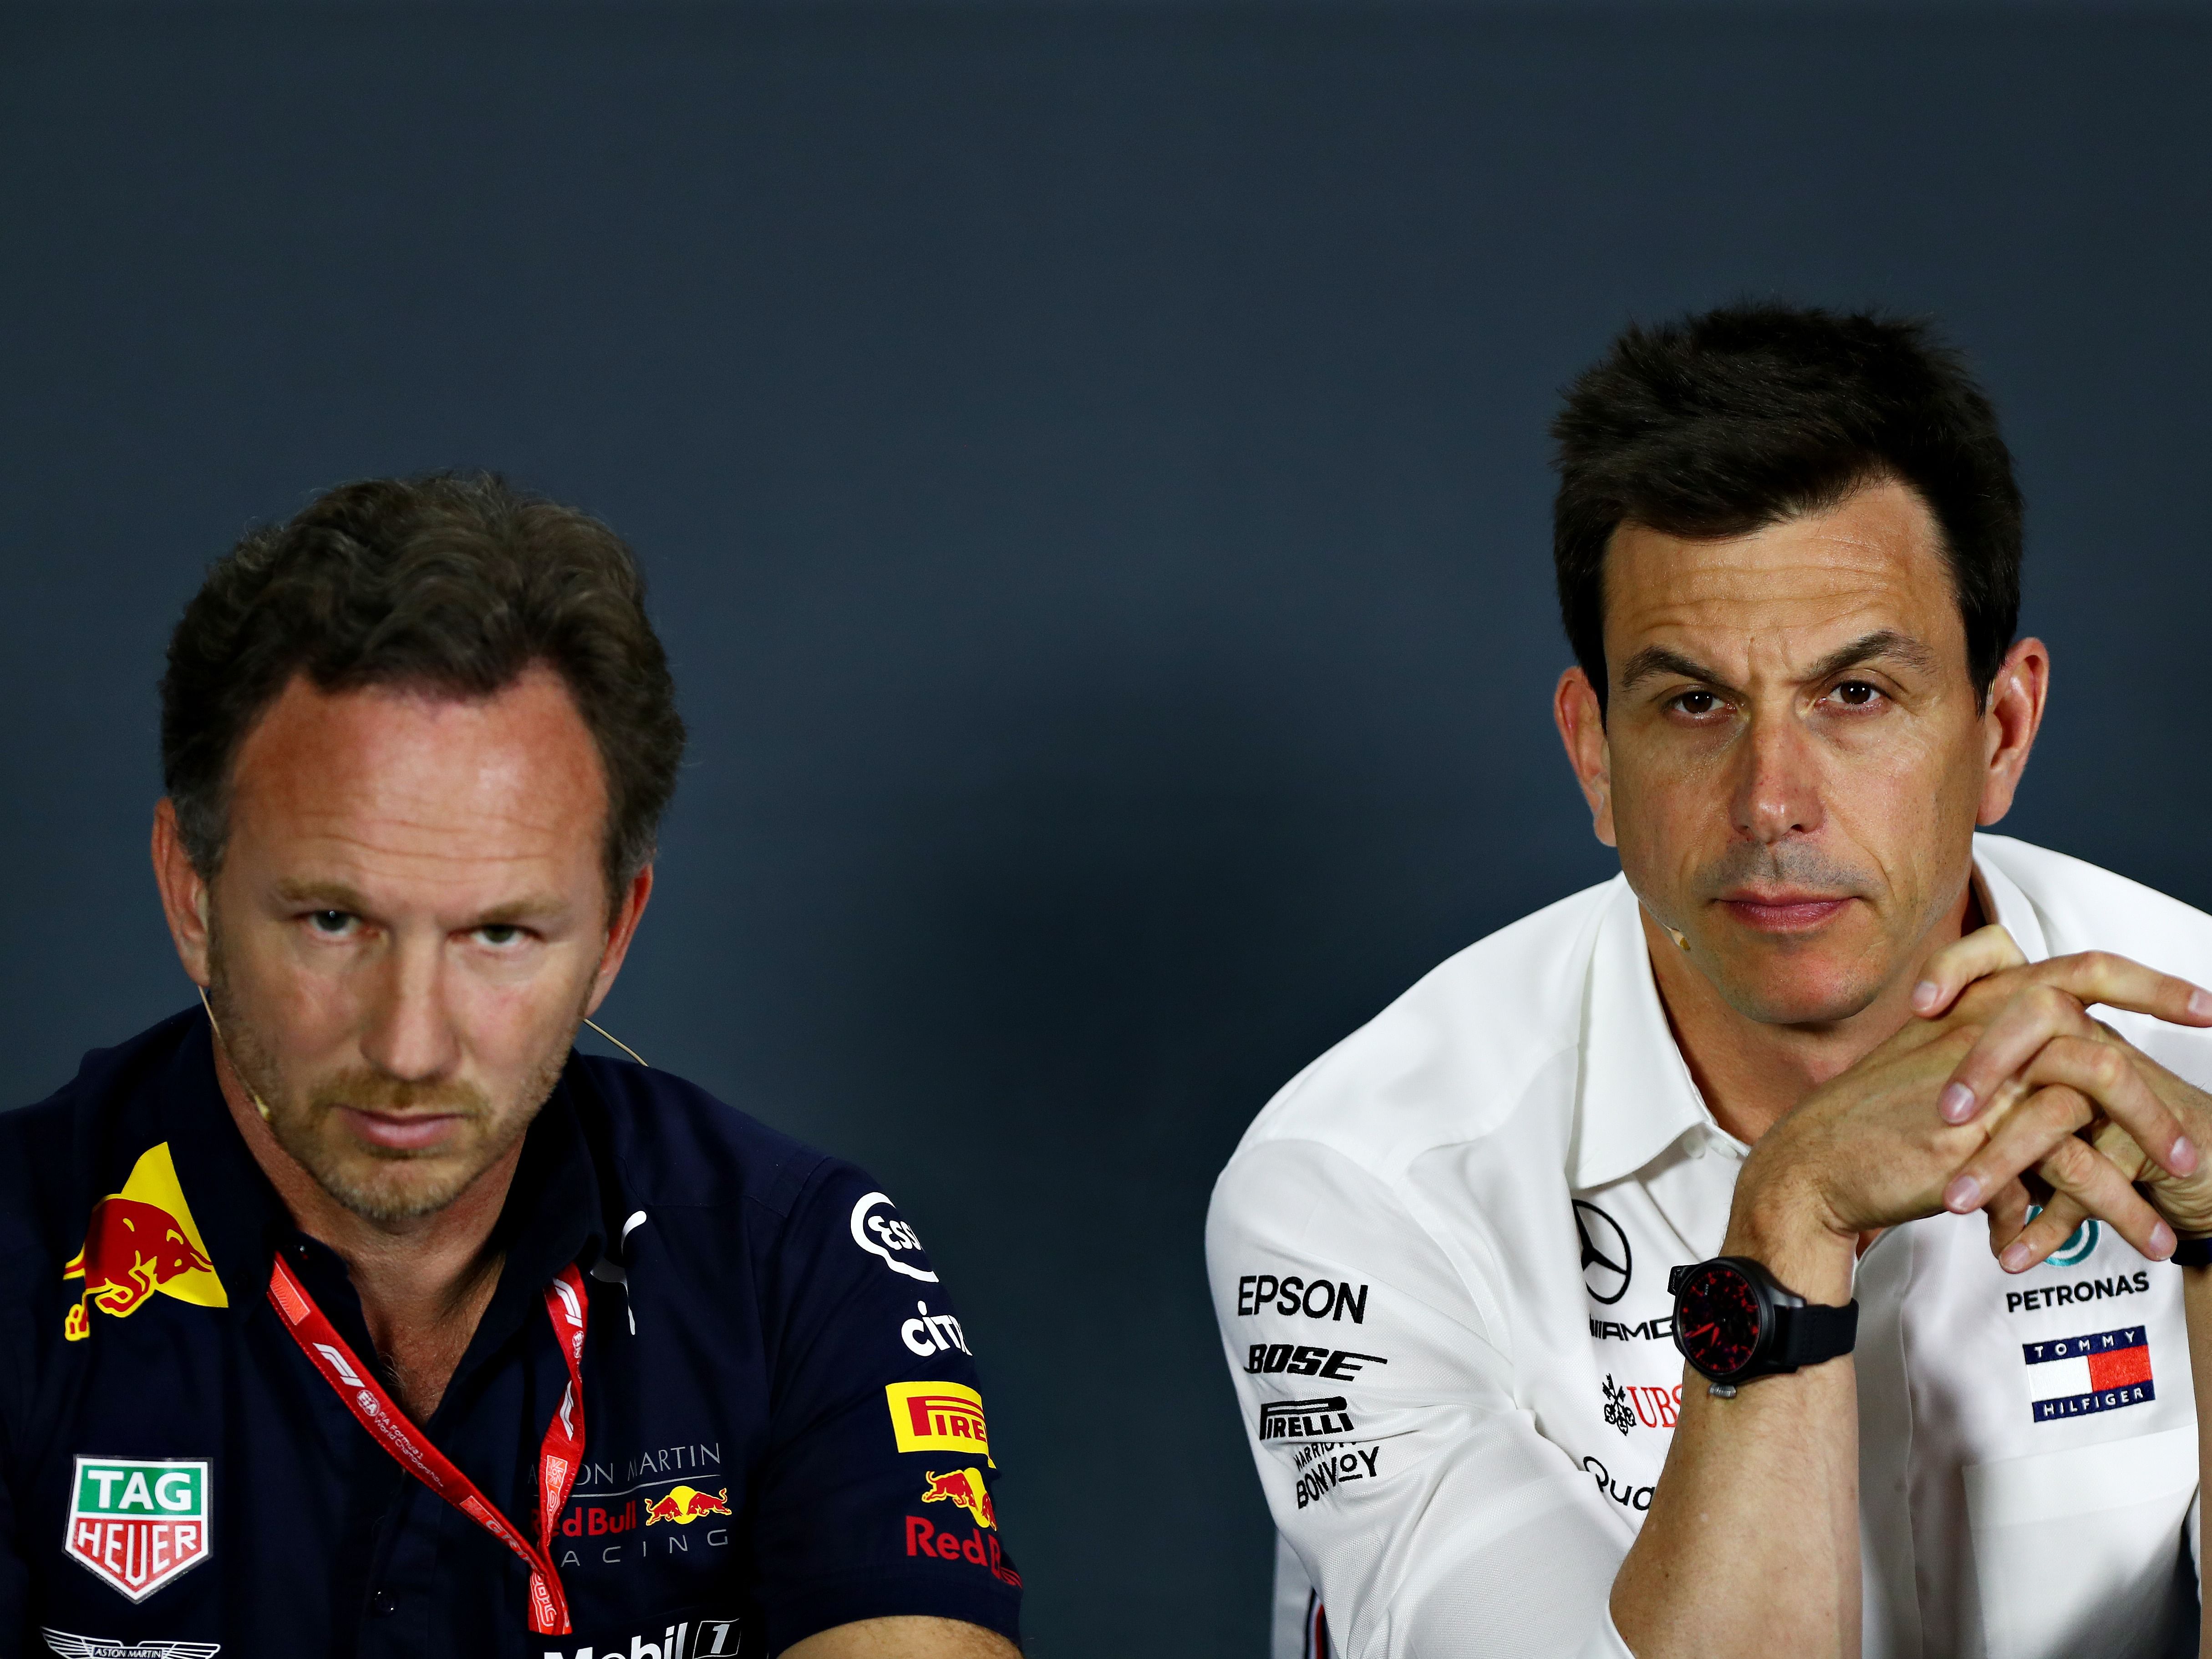 Toto Wolff and Christian Horner talk in the Team Principals Press Conference during practice for the 2019 F1 Azerbaijan Grand Prix. (Photo by Dan Istitene/Getty Images)